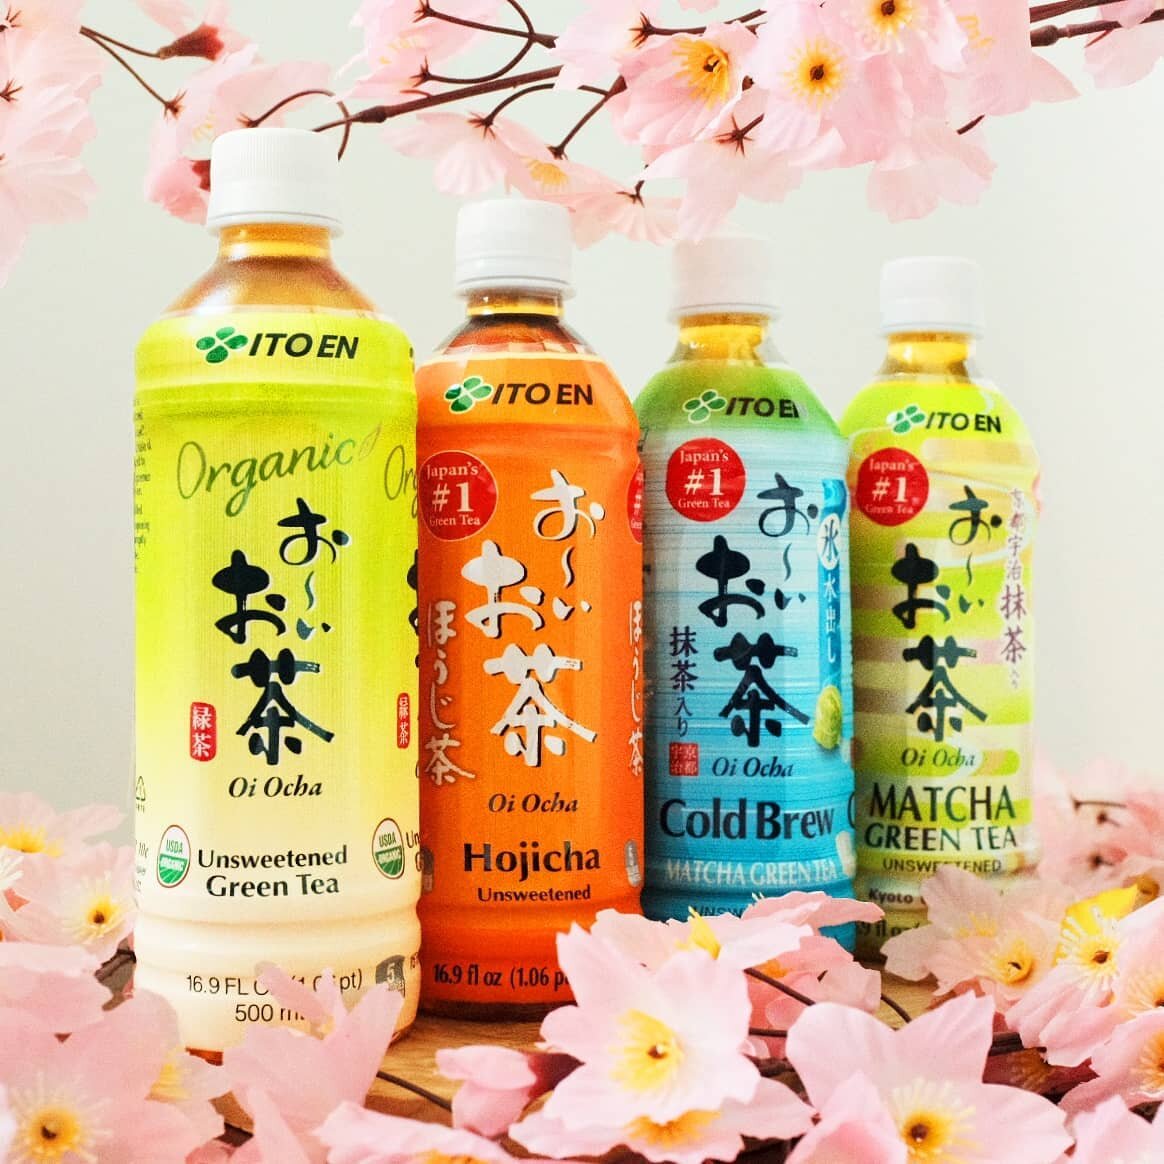 Move oolong nothing to tea here 🍵🫖

Ito en 2L Teas at $5.10
Ito en 500ml Teas at $2.15

#itoen #tea #oolongtea #hojicha #coldbrewtea #greentea #matcha #spring #cherryblossom #asiansupermarket #shoplocal #bc #vancouver #richmond #riceworld #veryvanc